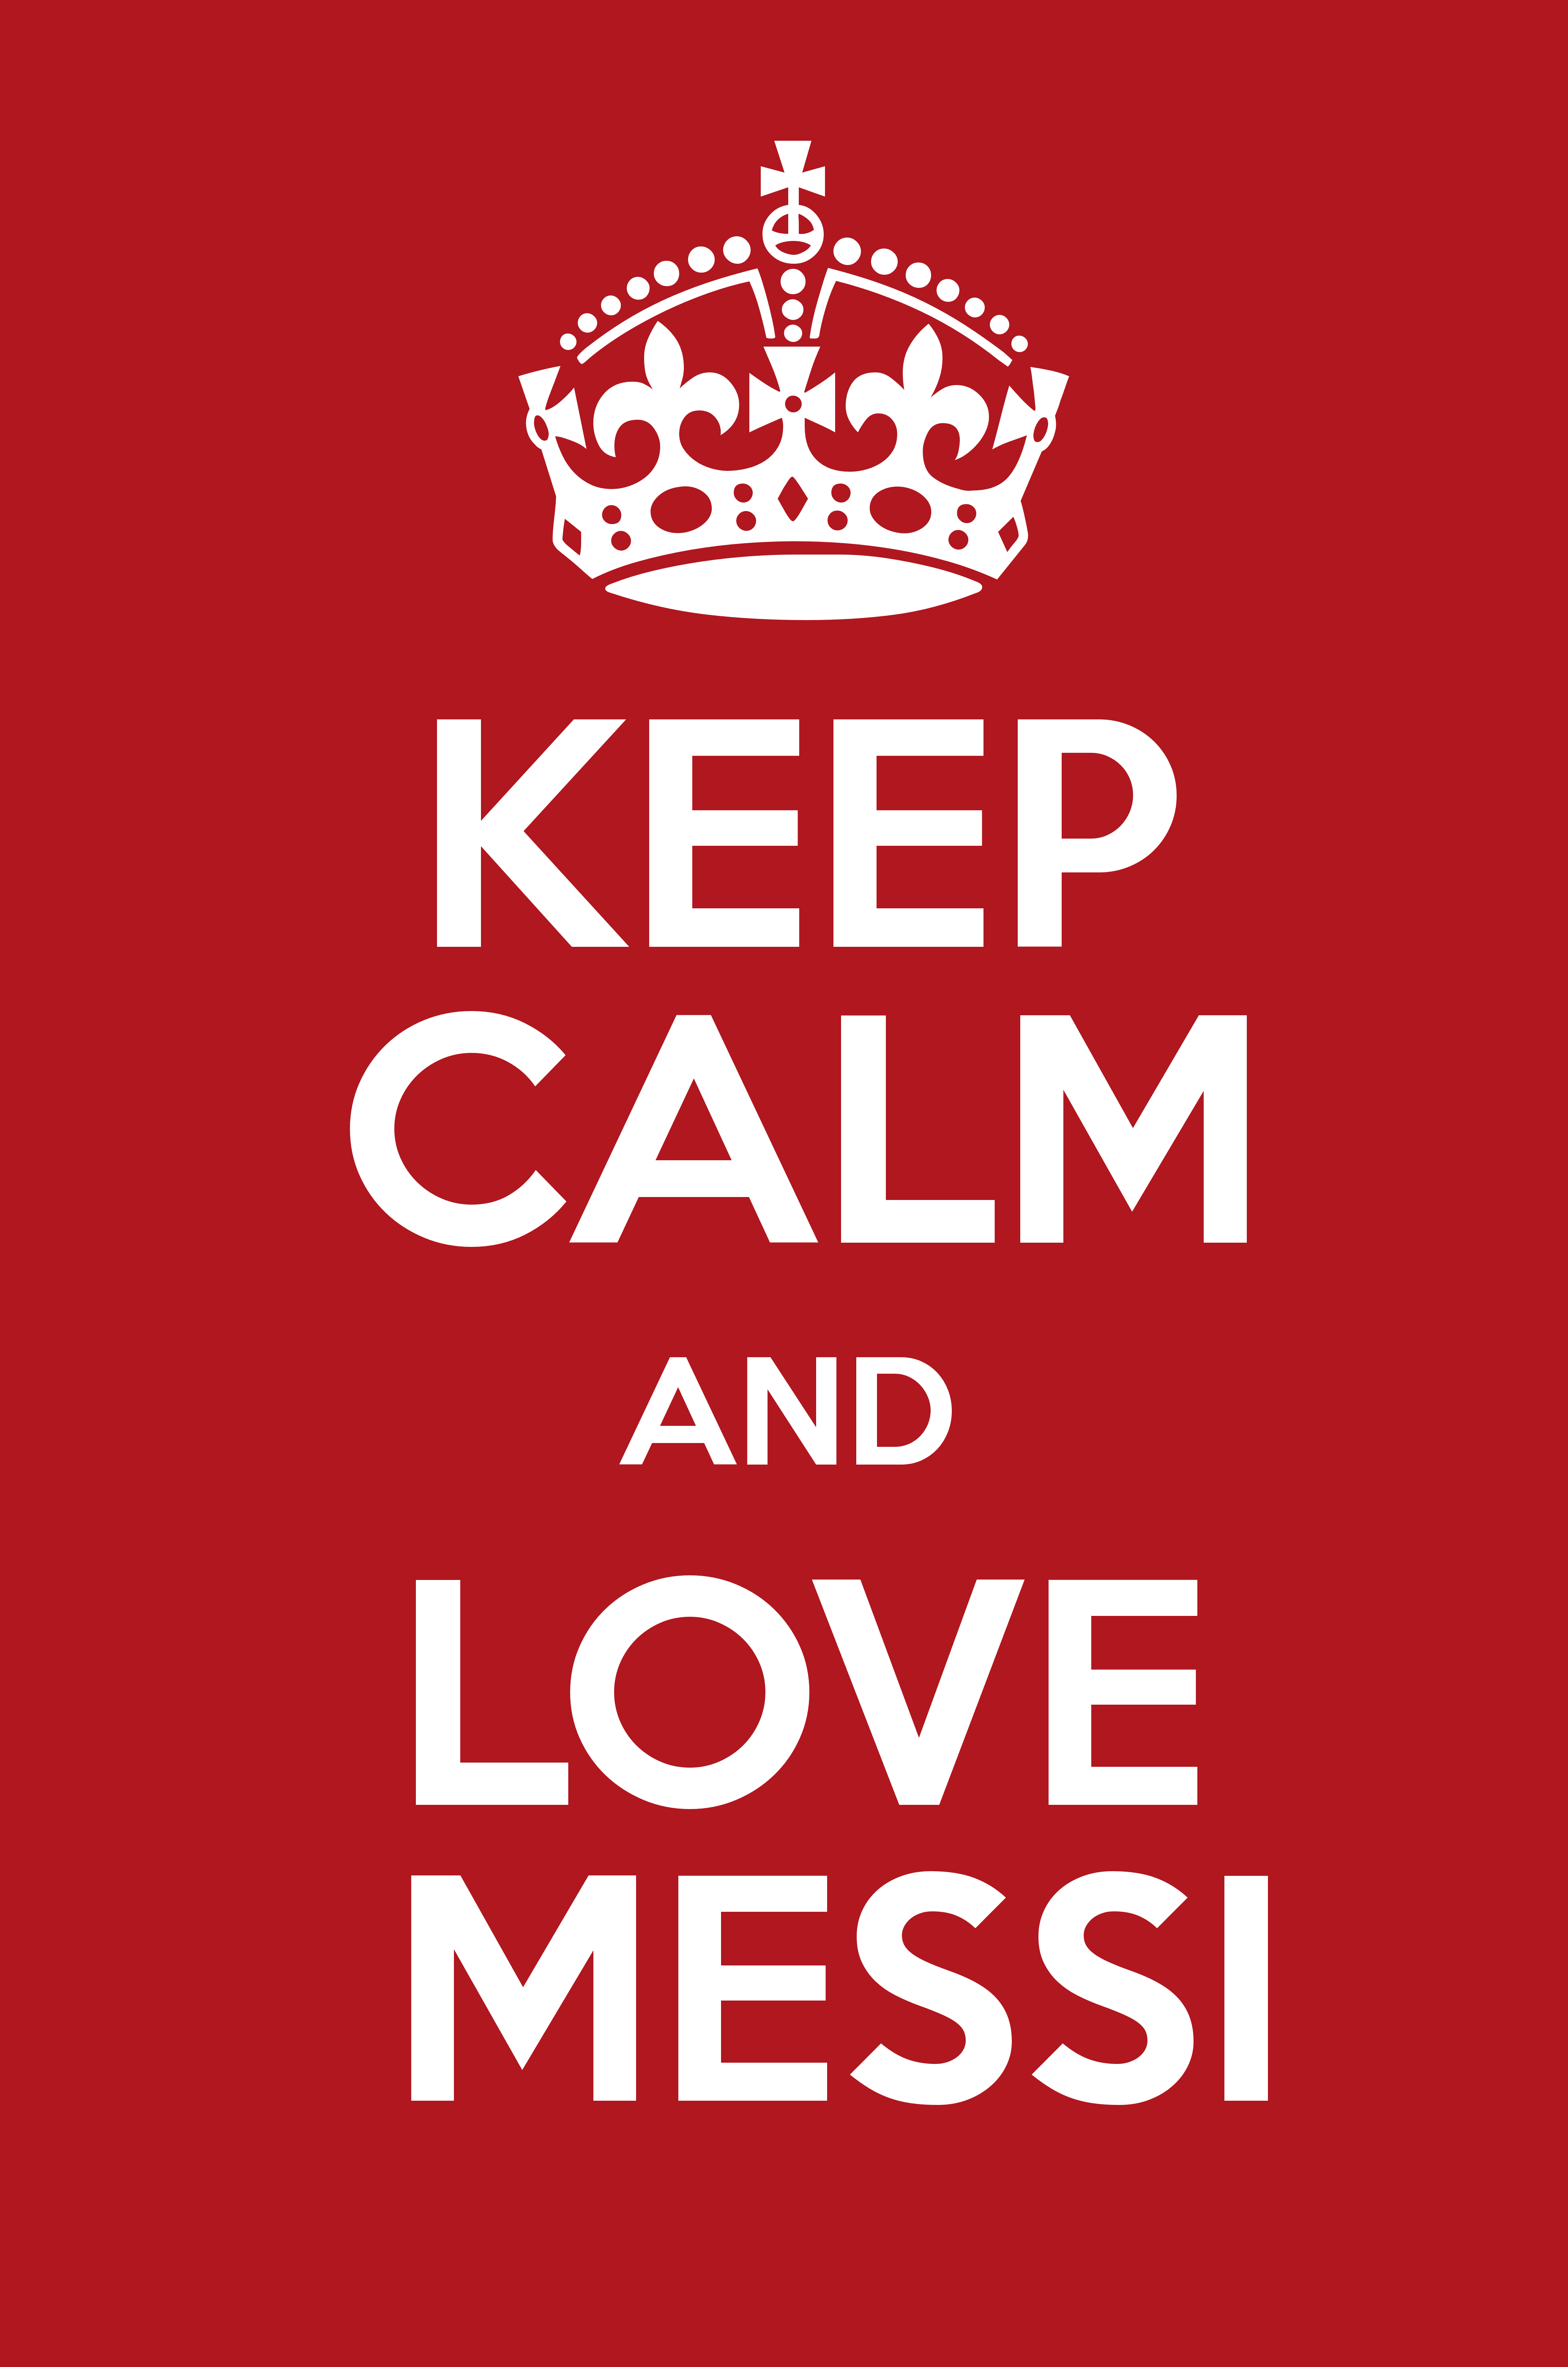 KEEP CALM AND LOVE MESSI Calm and Posters Generator, Maker